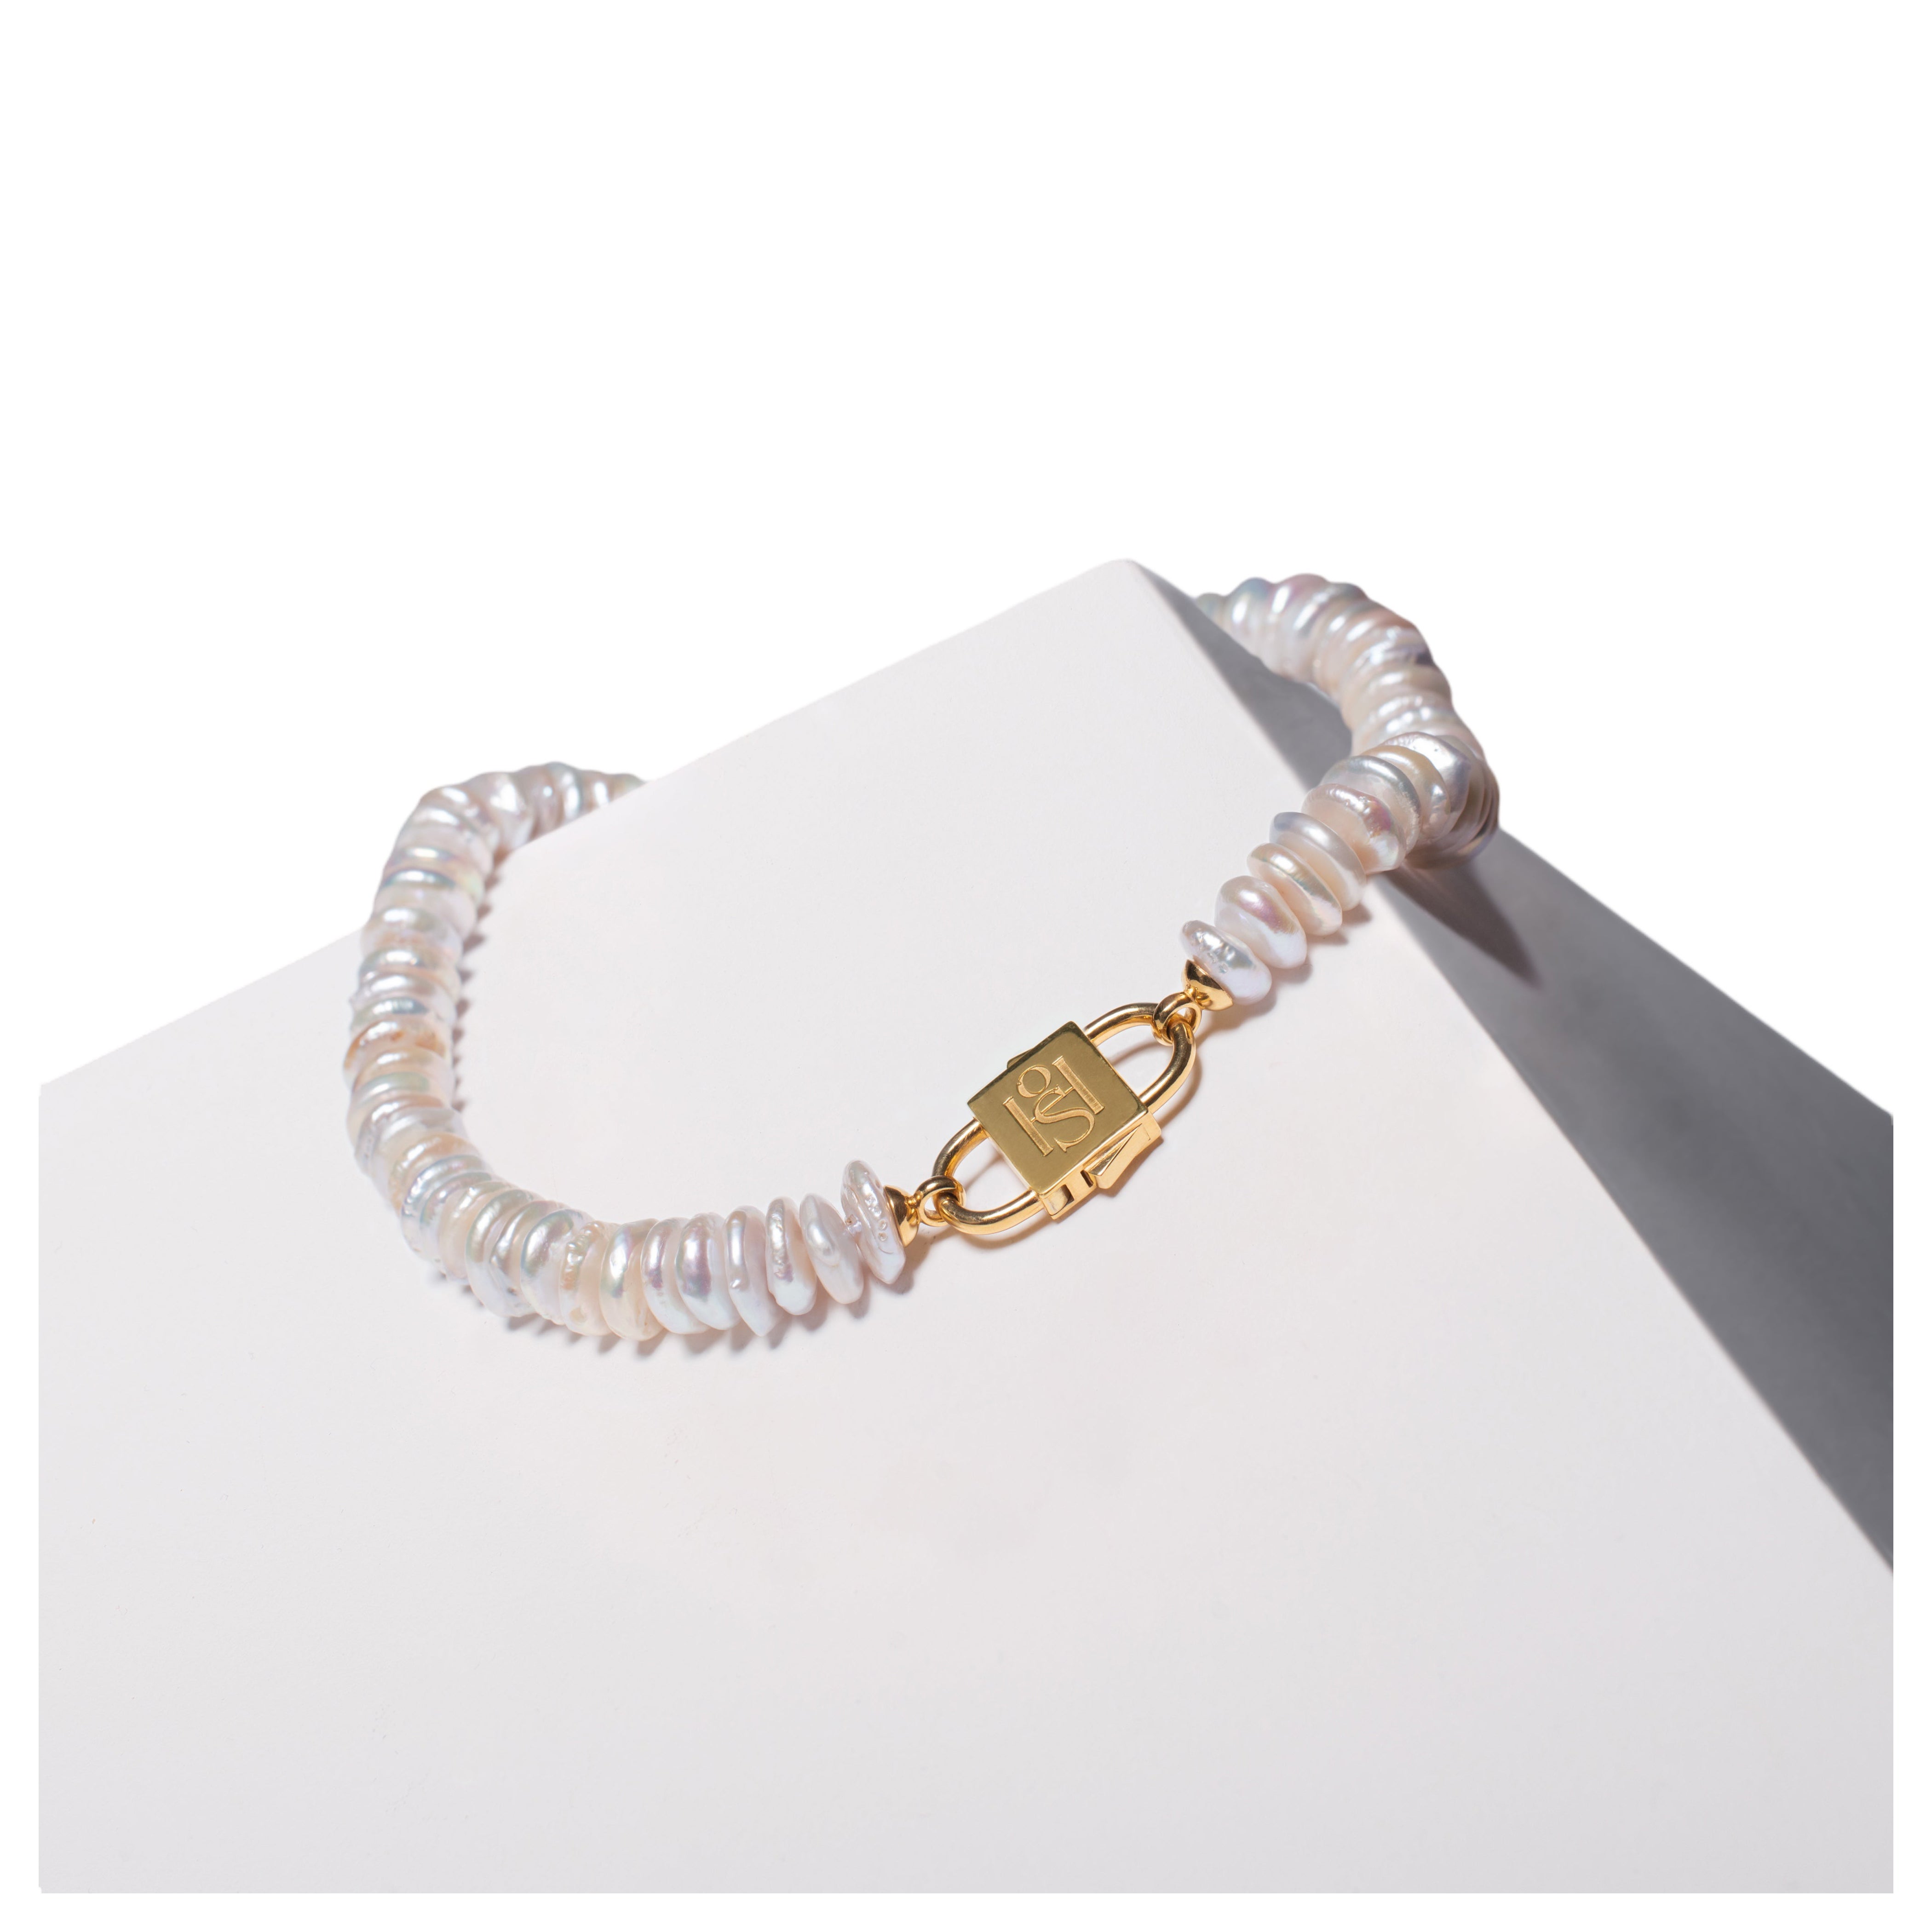 House of Sol Rondelle Pearl Necklace with 24K Gold Filled HoS Lock For Sale